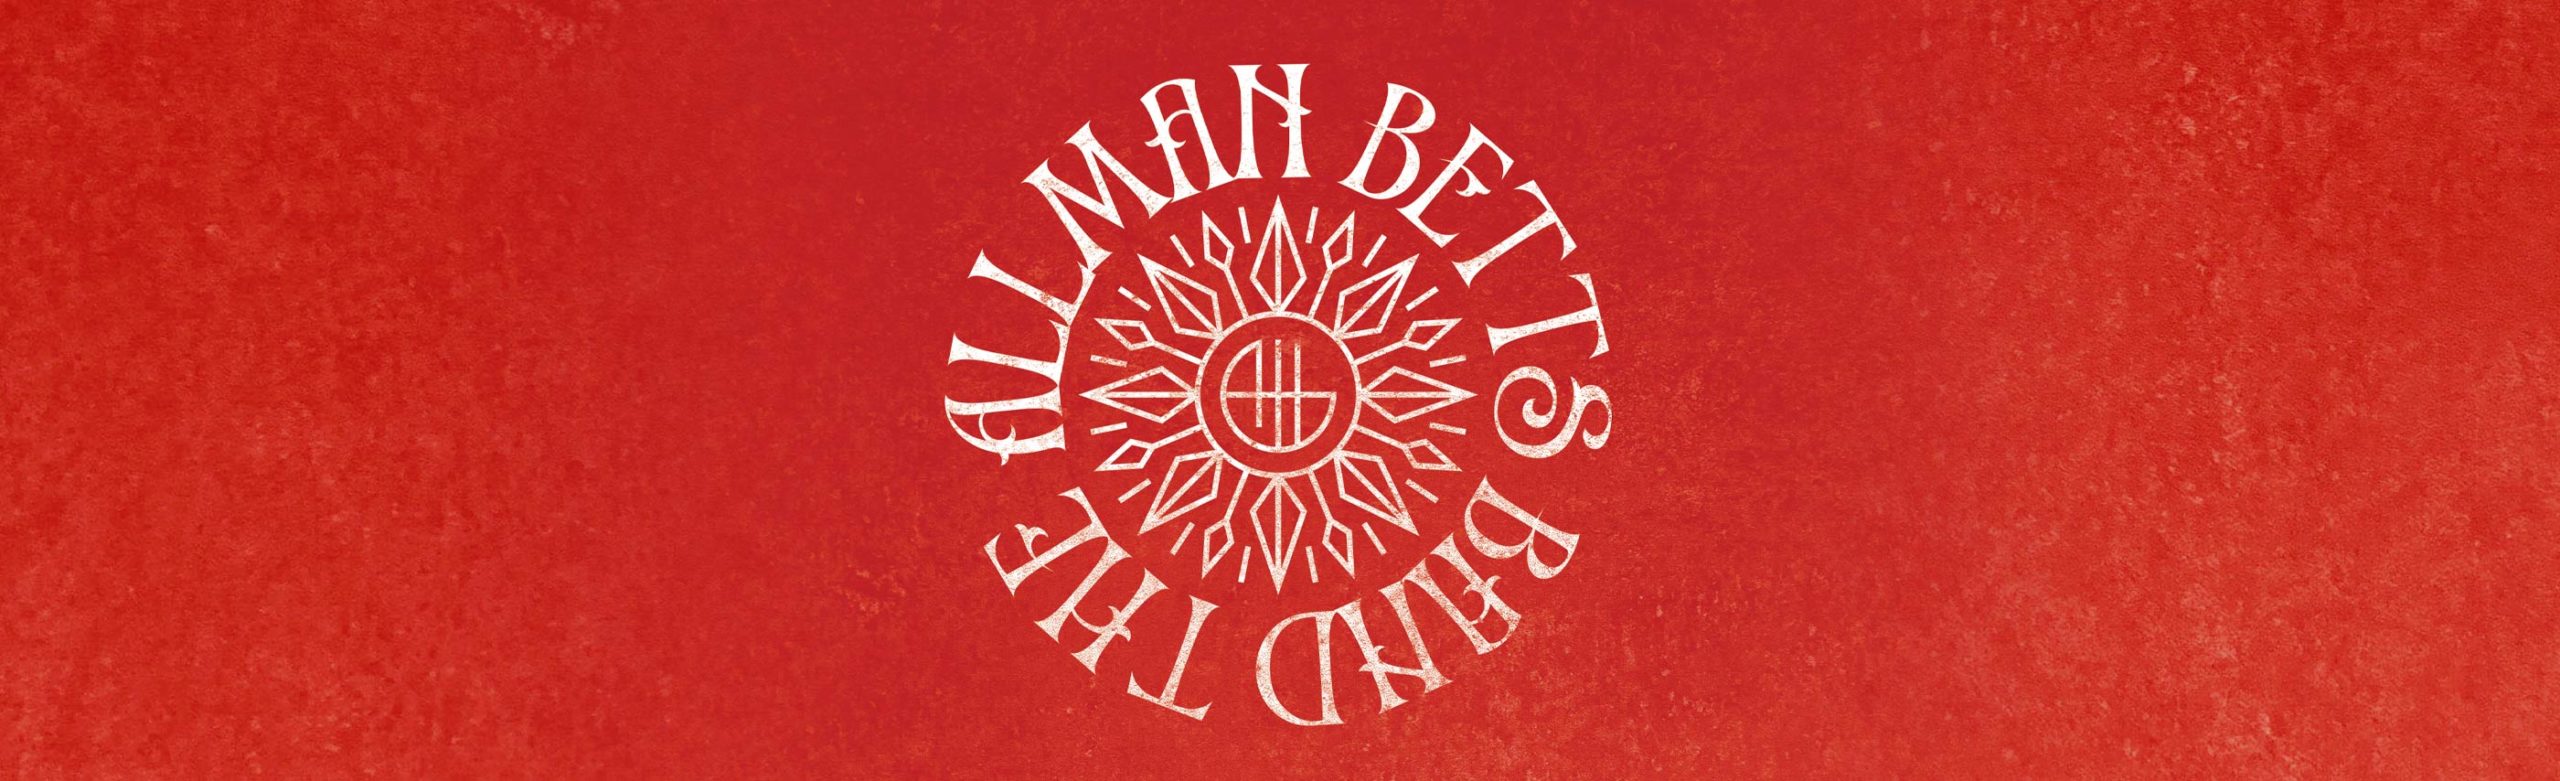 Event Info: The Allman Betts Band at The ELM 2021 Image